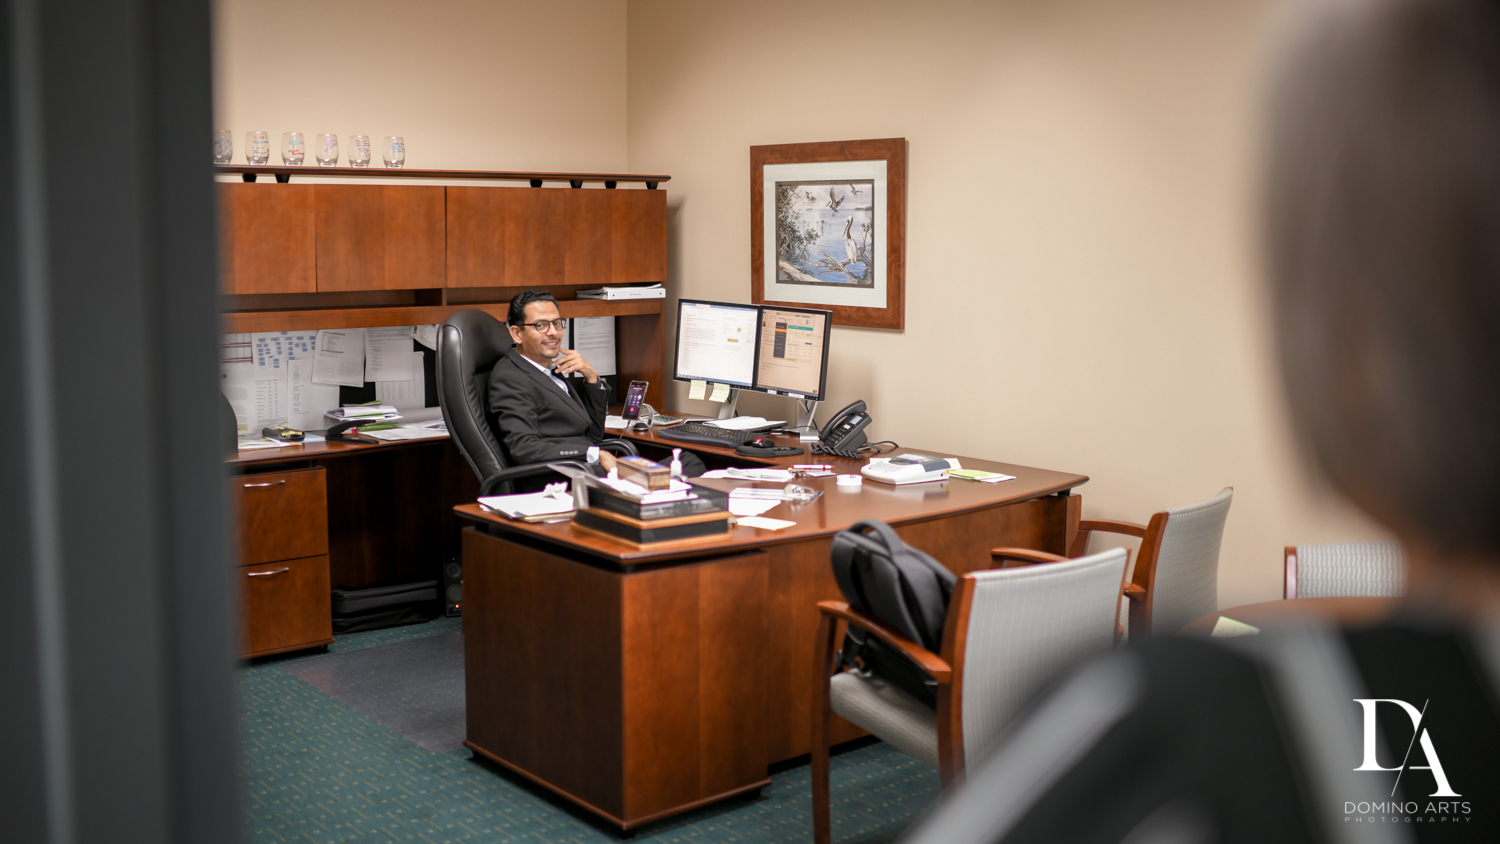 fun office pics at Corporate Photography Power Financial Credit Union in Pembroke Pines